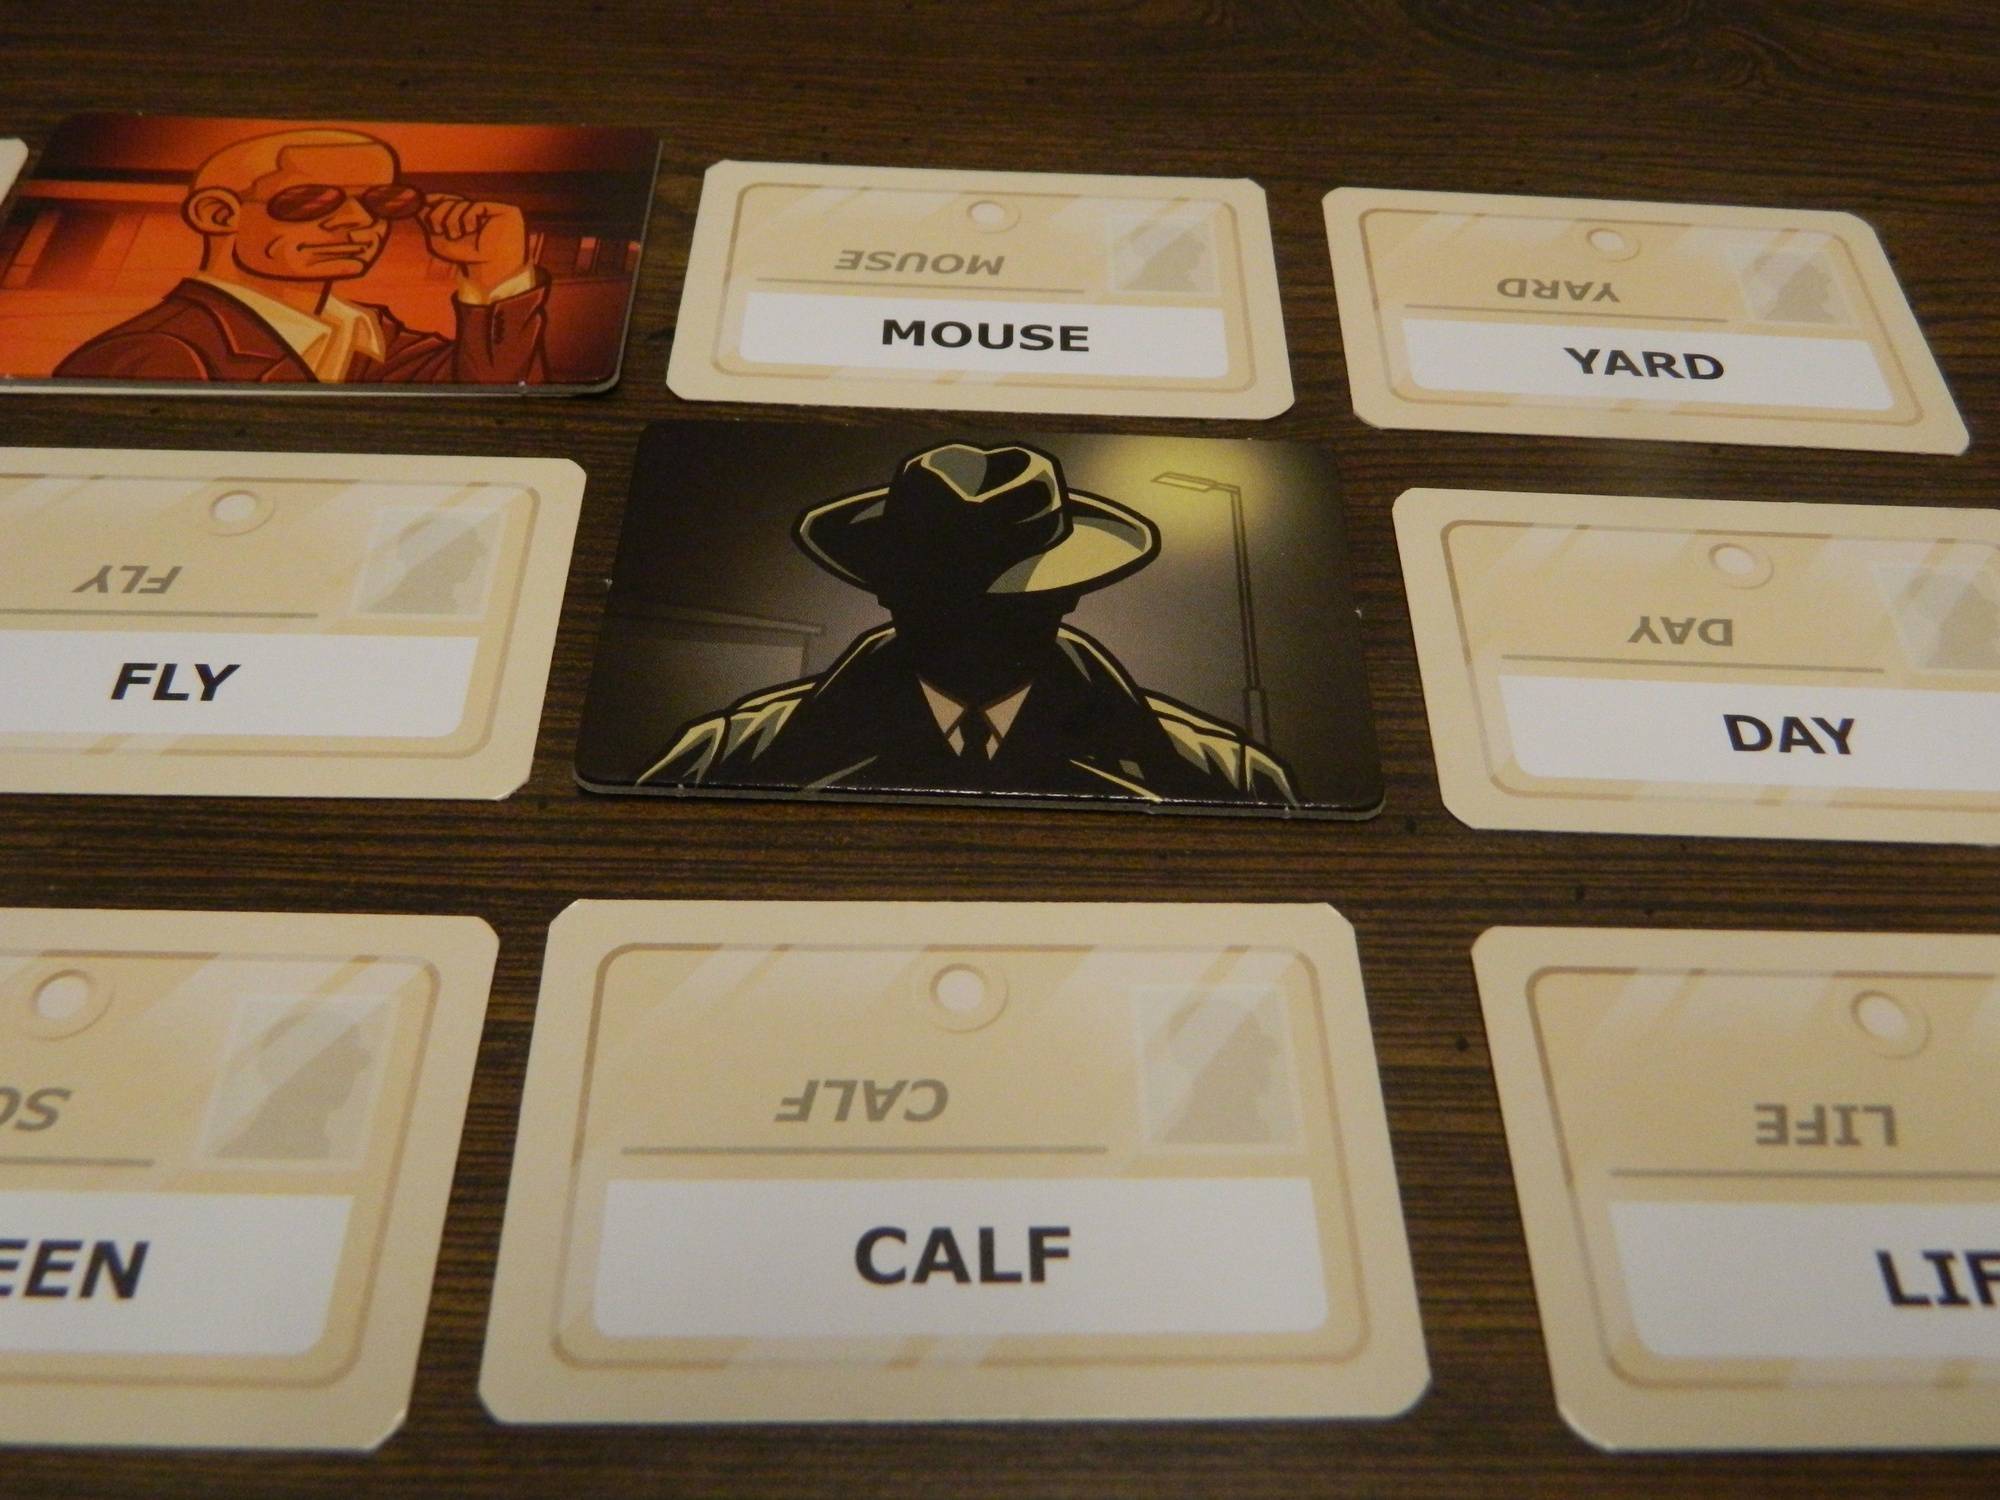 My niche is becoming board game comedy ??? #codenames #boardgames